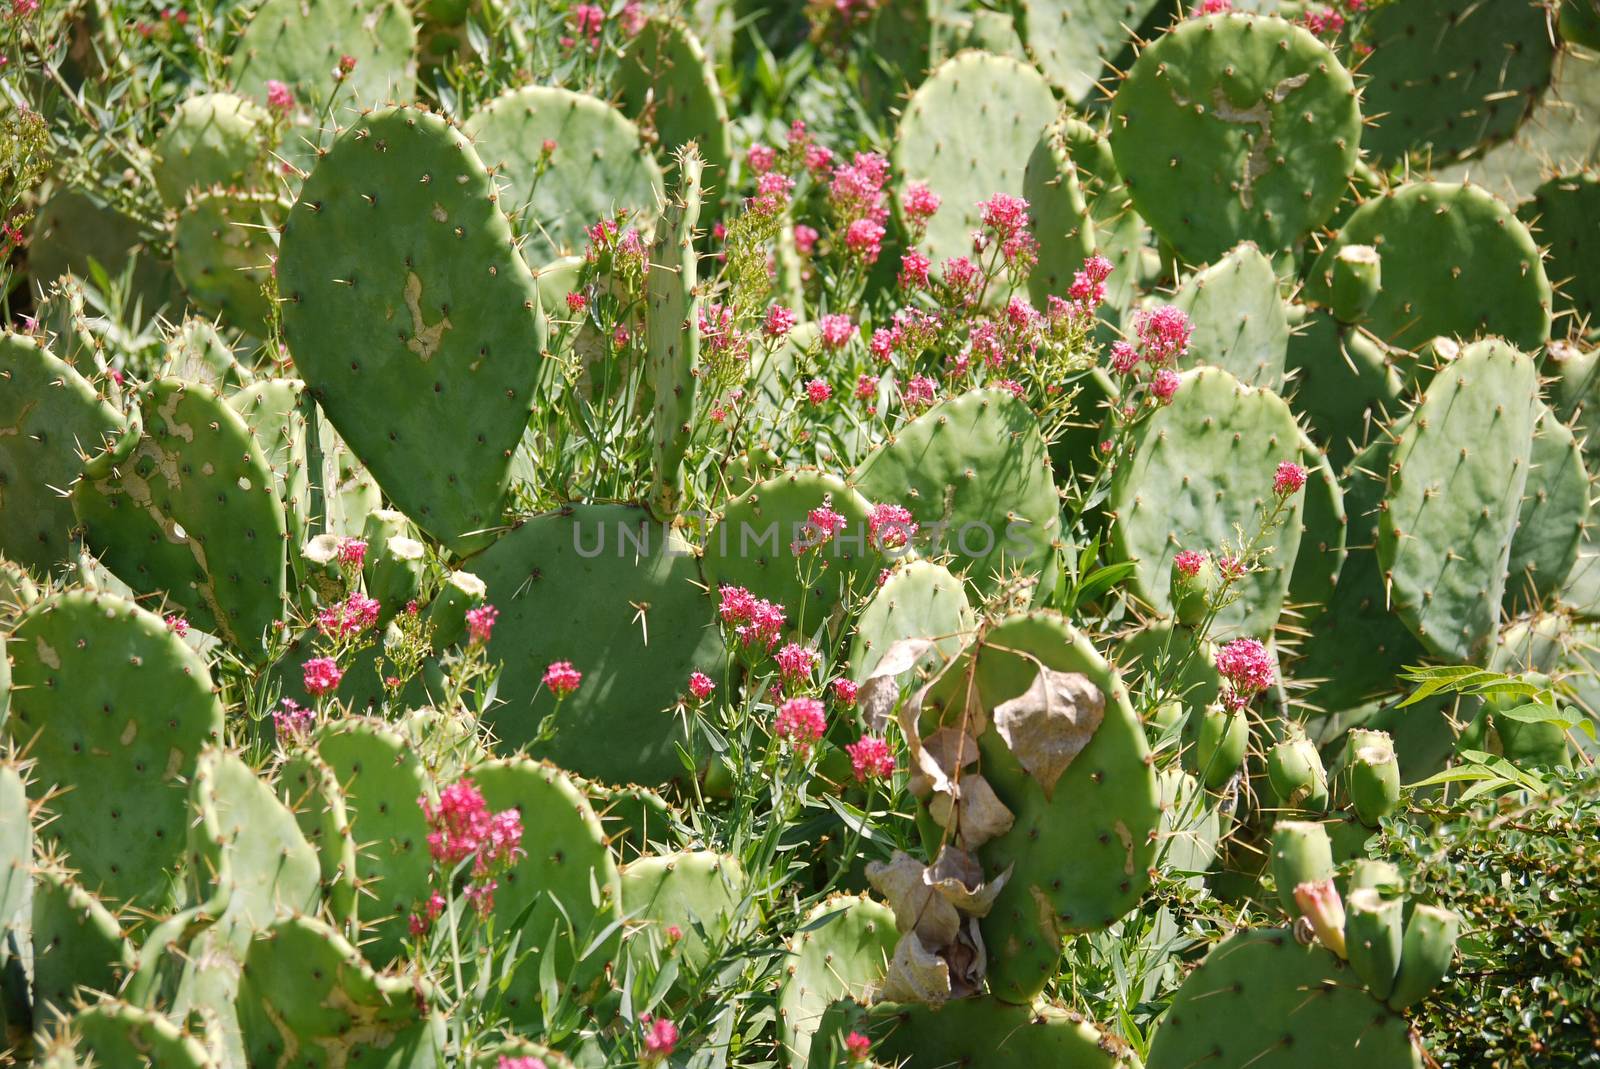 lively cacti with wide green leaves with spines